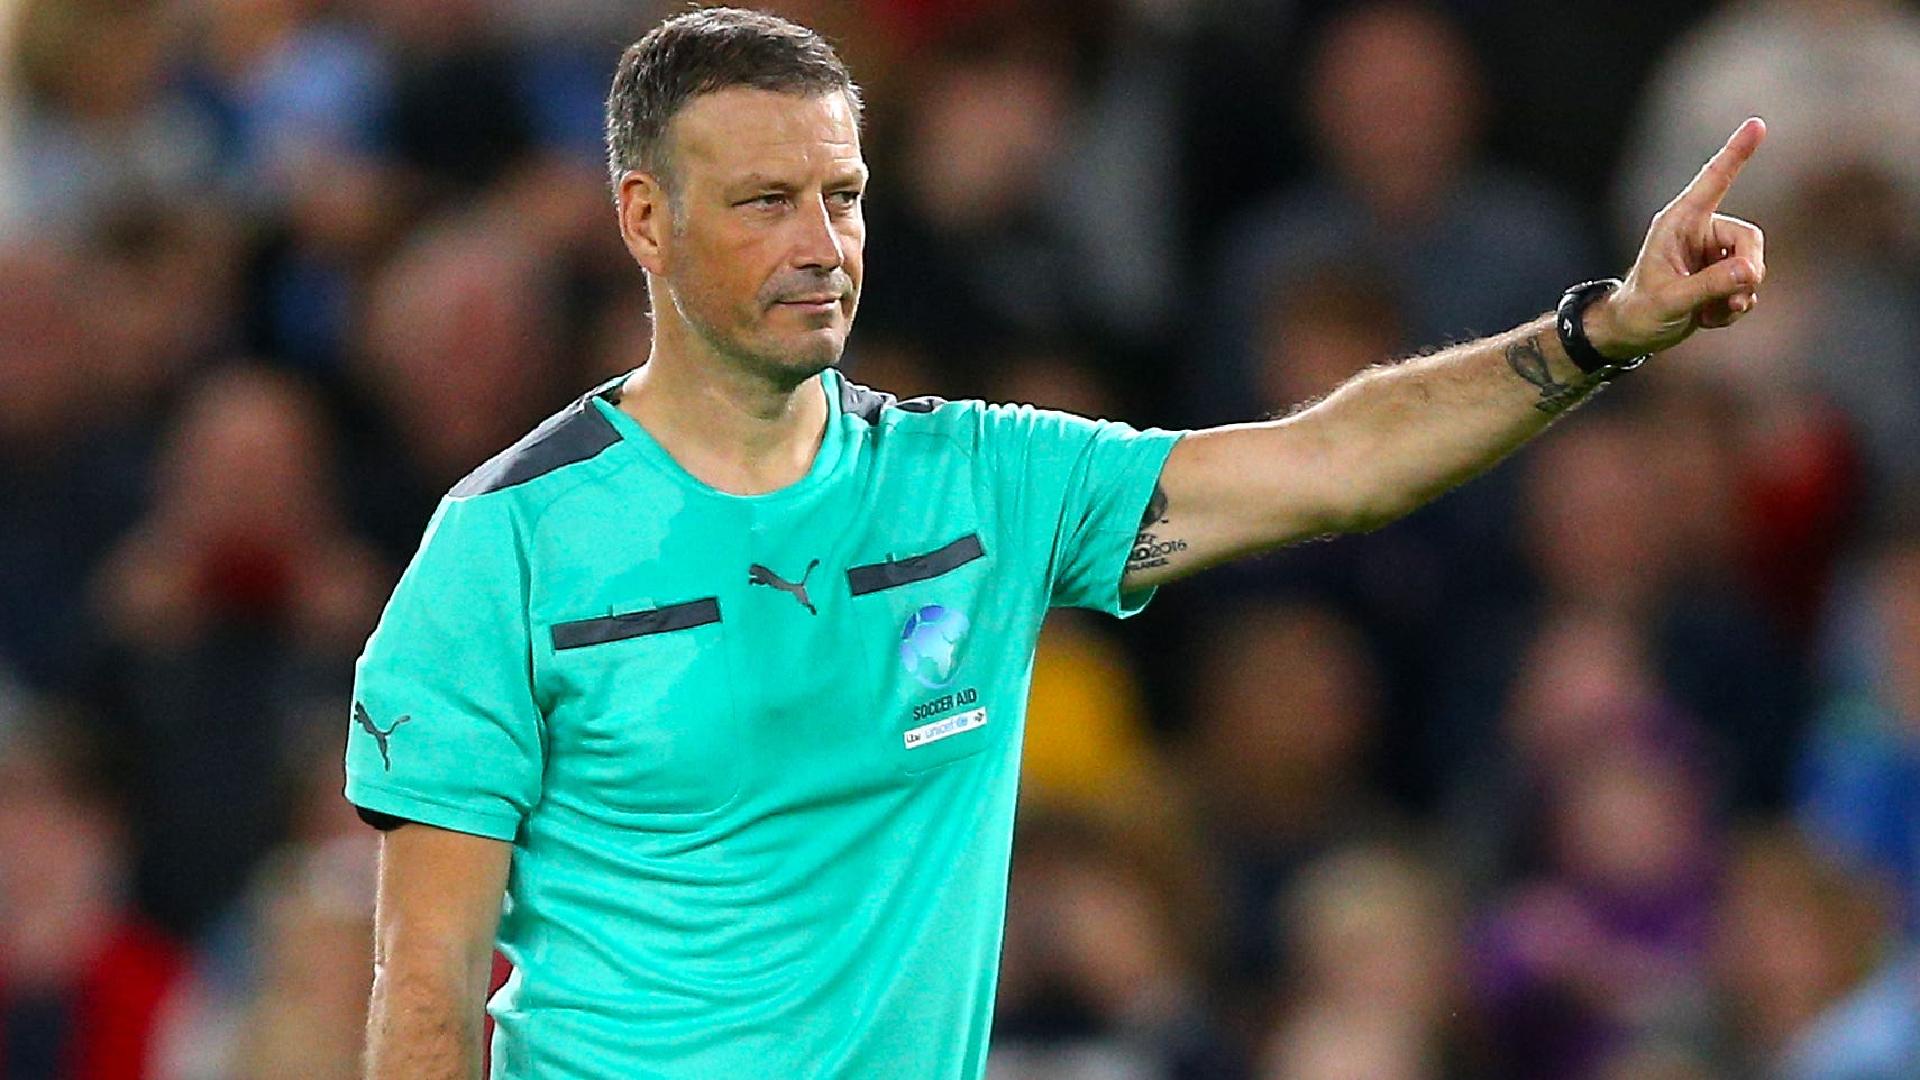 Ref welfare charity fears Mark Clattenburg ‘may be used like a puppet’ by Forest